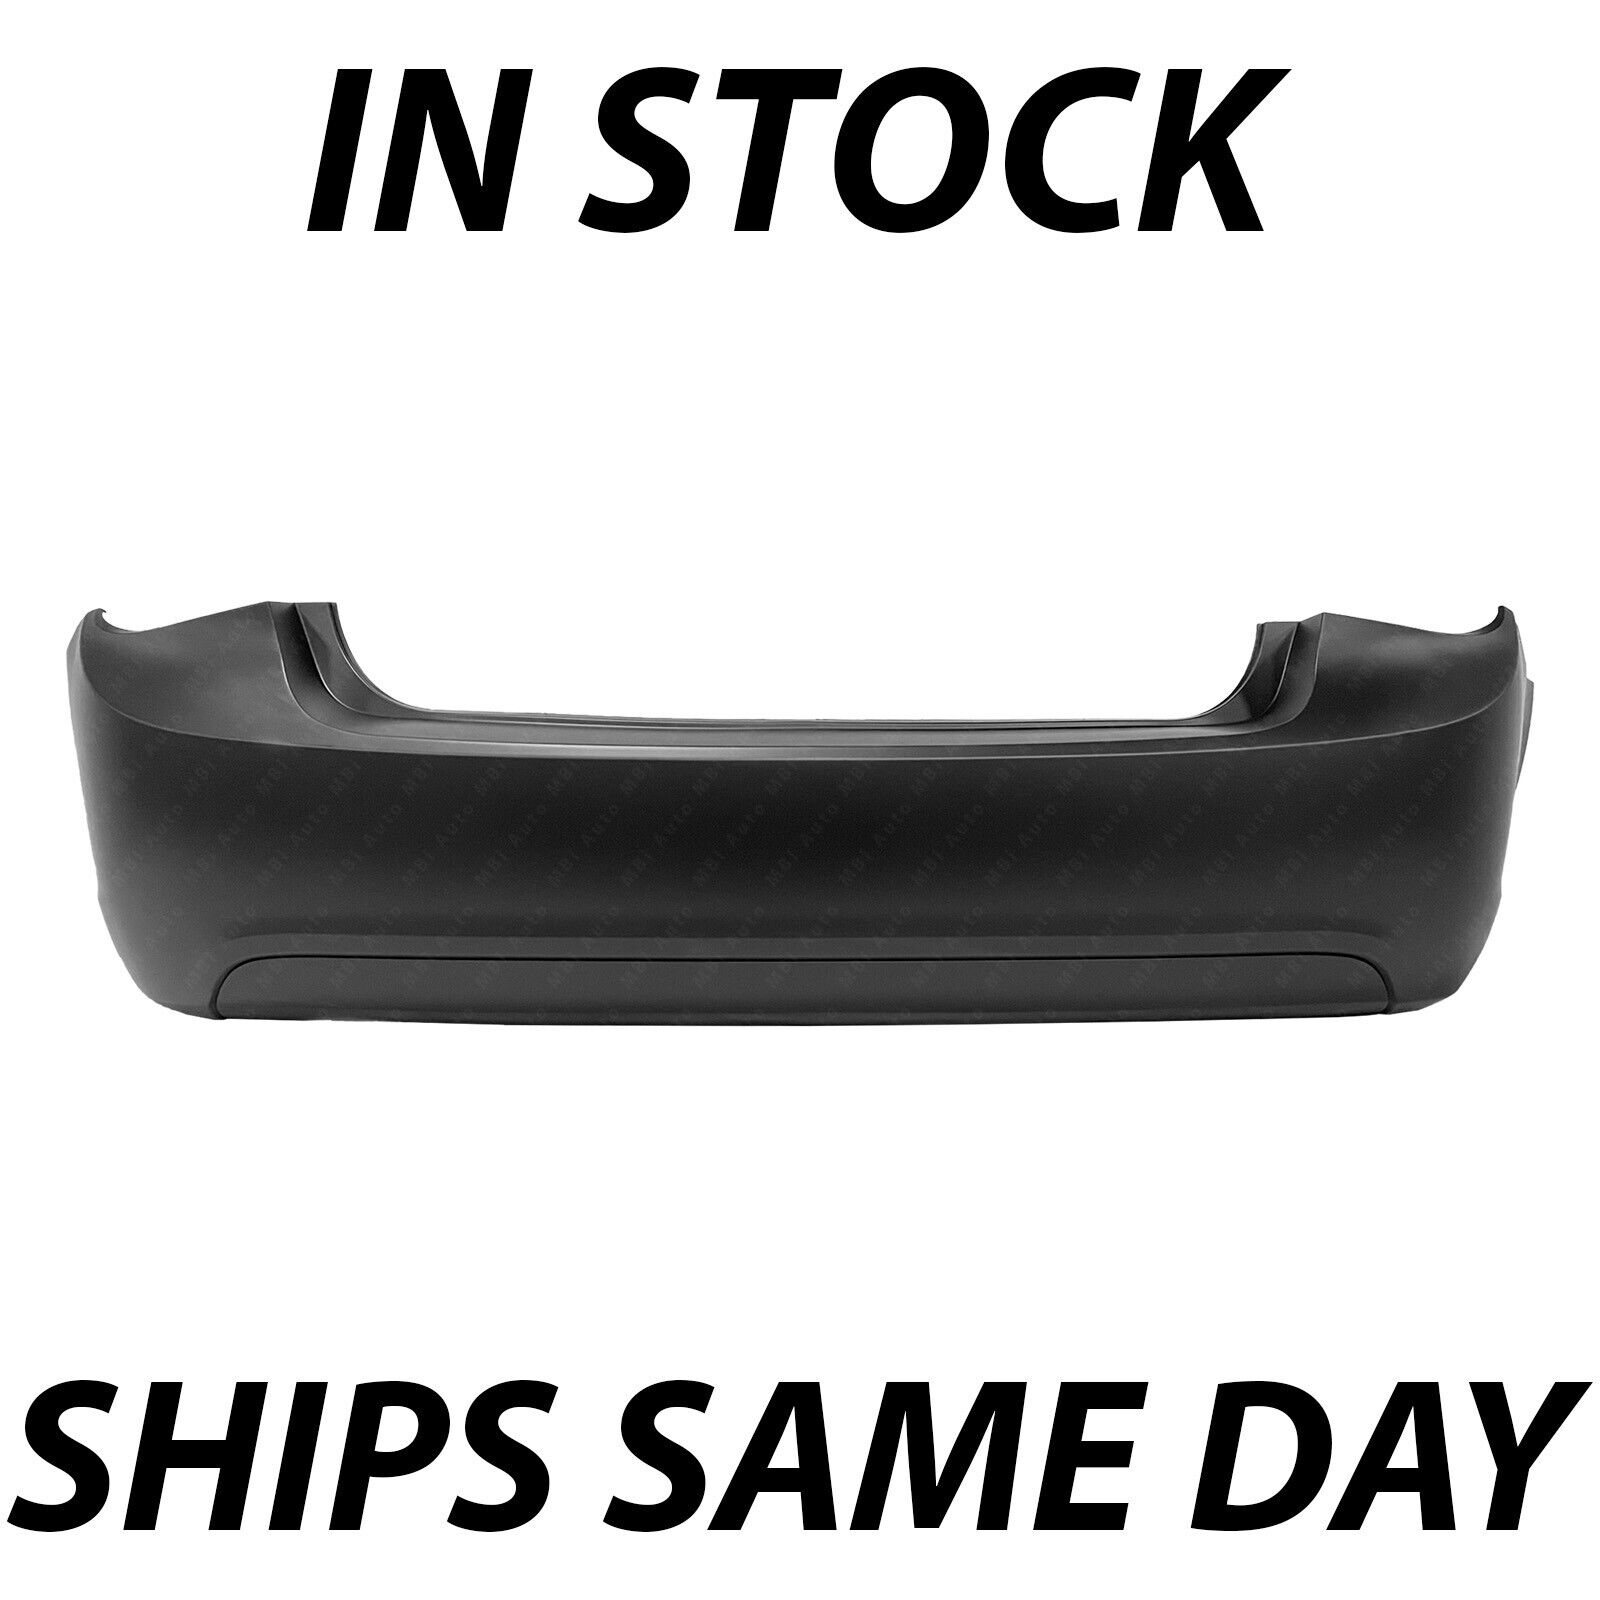 NEW Primered - Rear Bumper Cover for 2011 2012 2013 2014 2015 Chevy Cruze 11-15